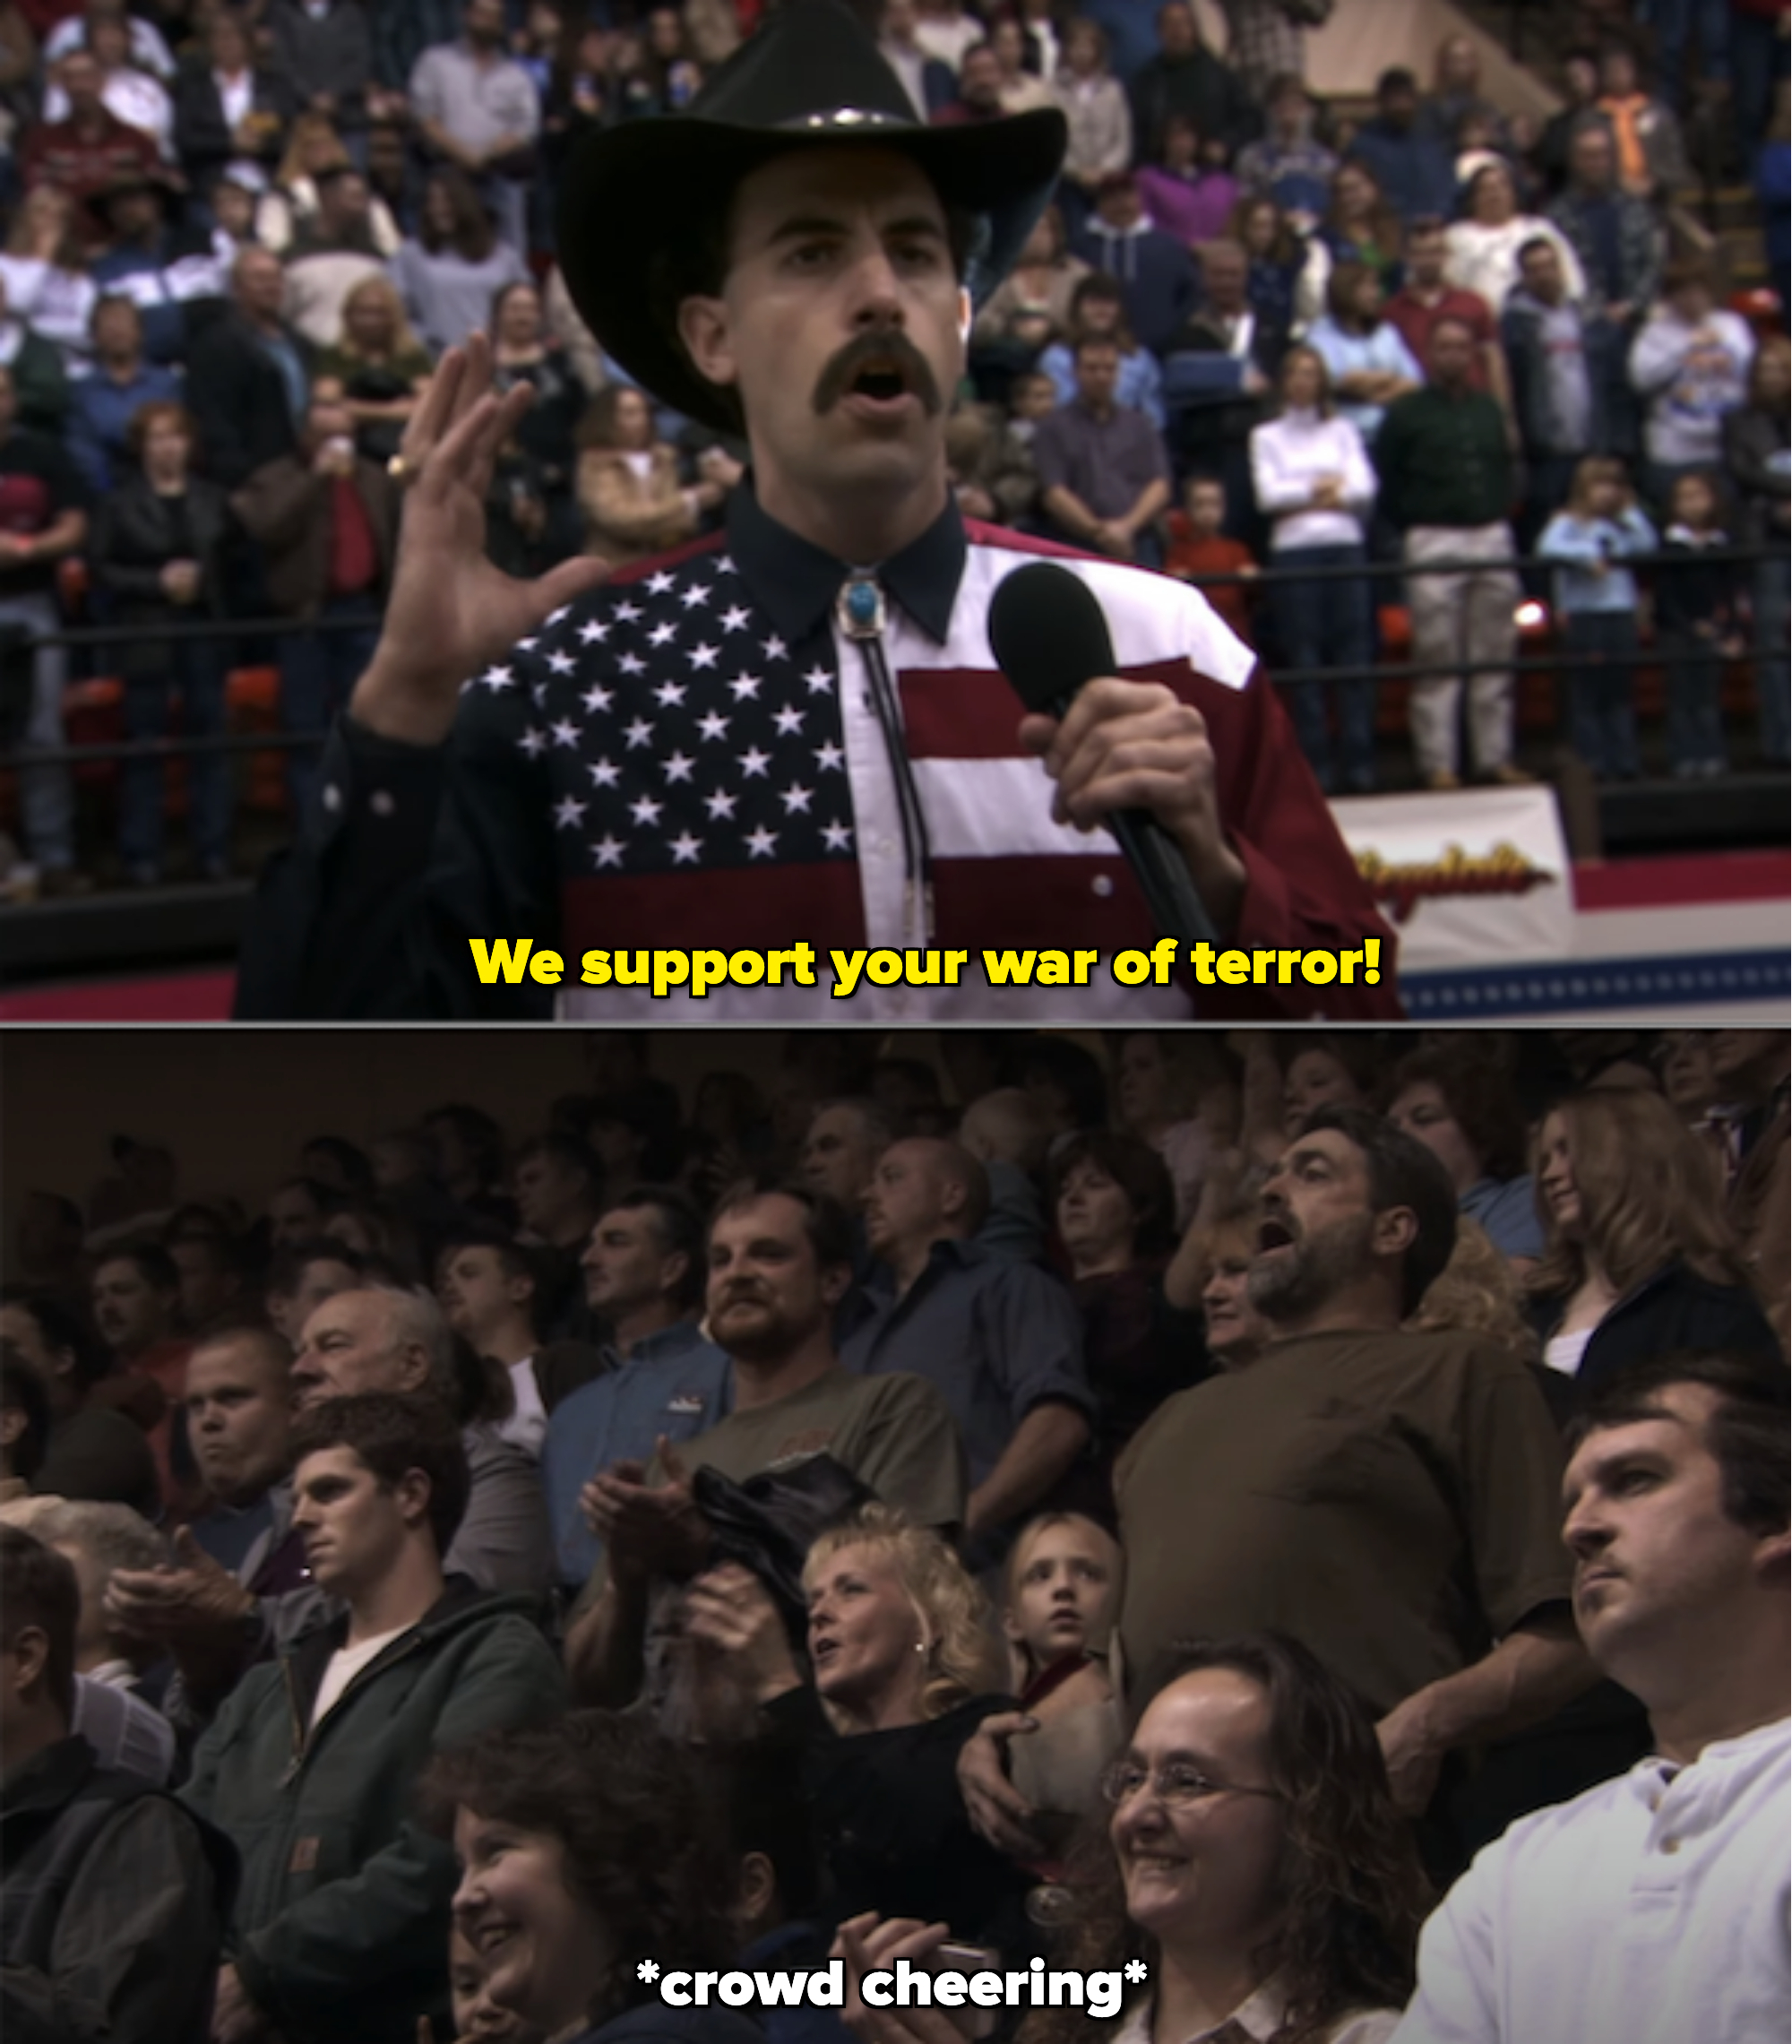 Borat in a shirt with the flag of the United States on it, singing in front of a crowd at a rodeo